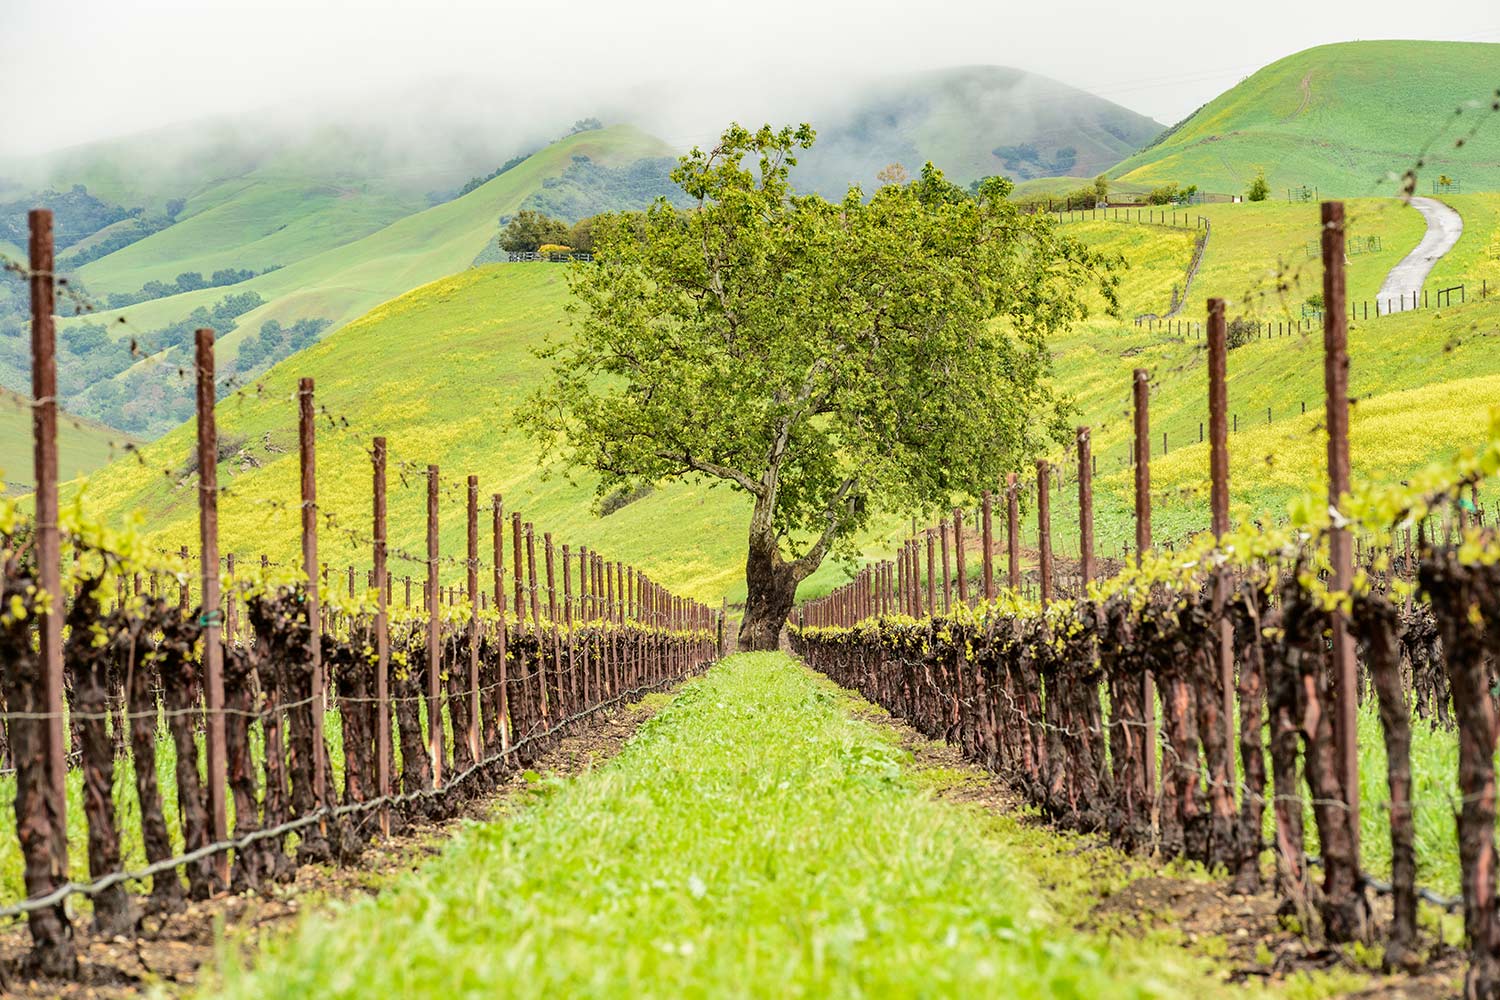 View down a vineyard aisle with a tree at the end surrounded by bright green hills